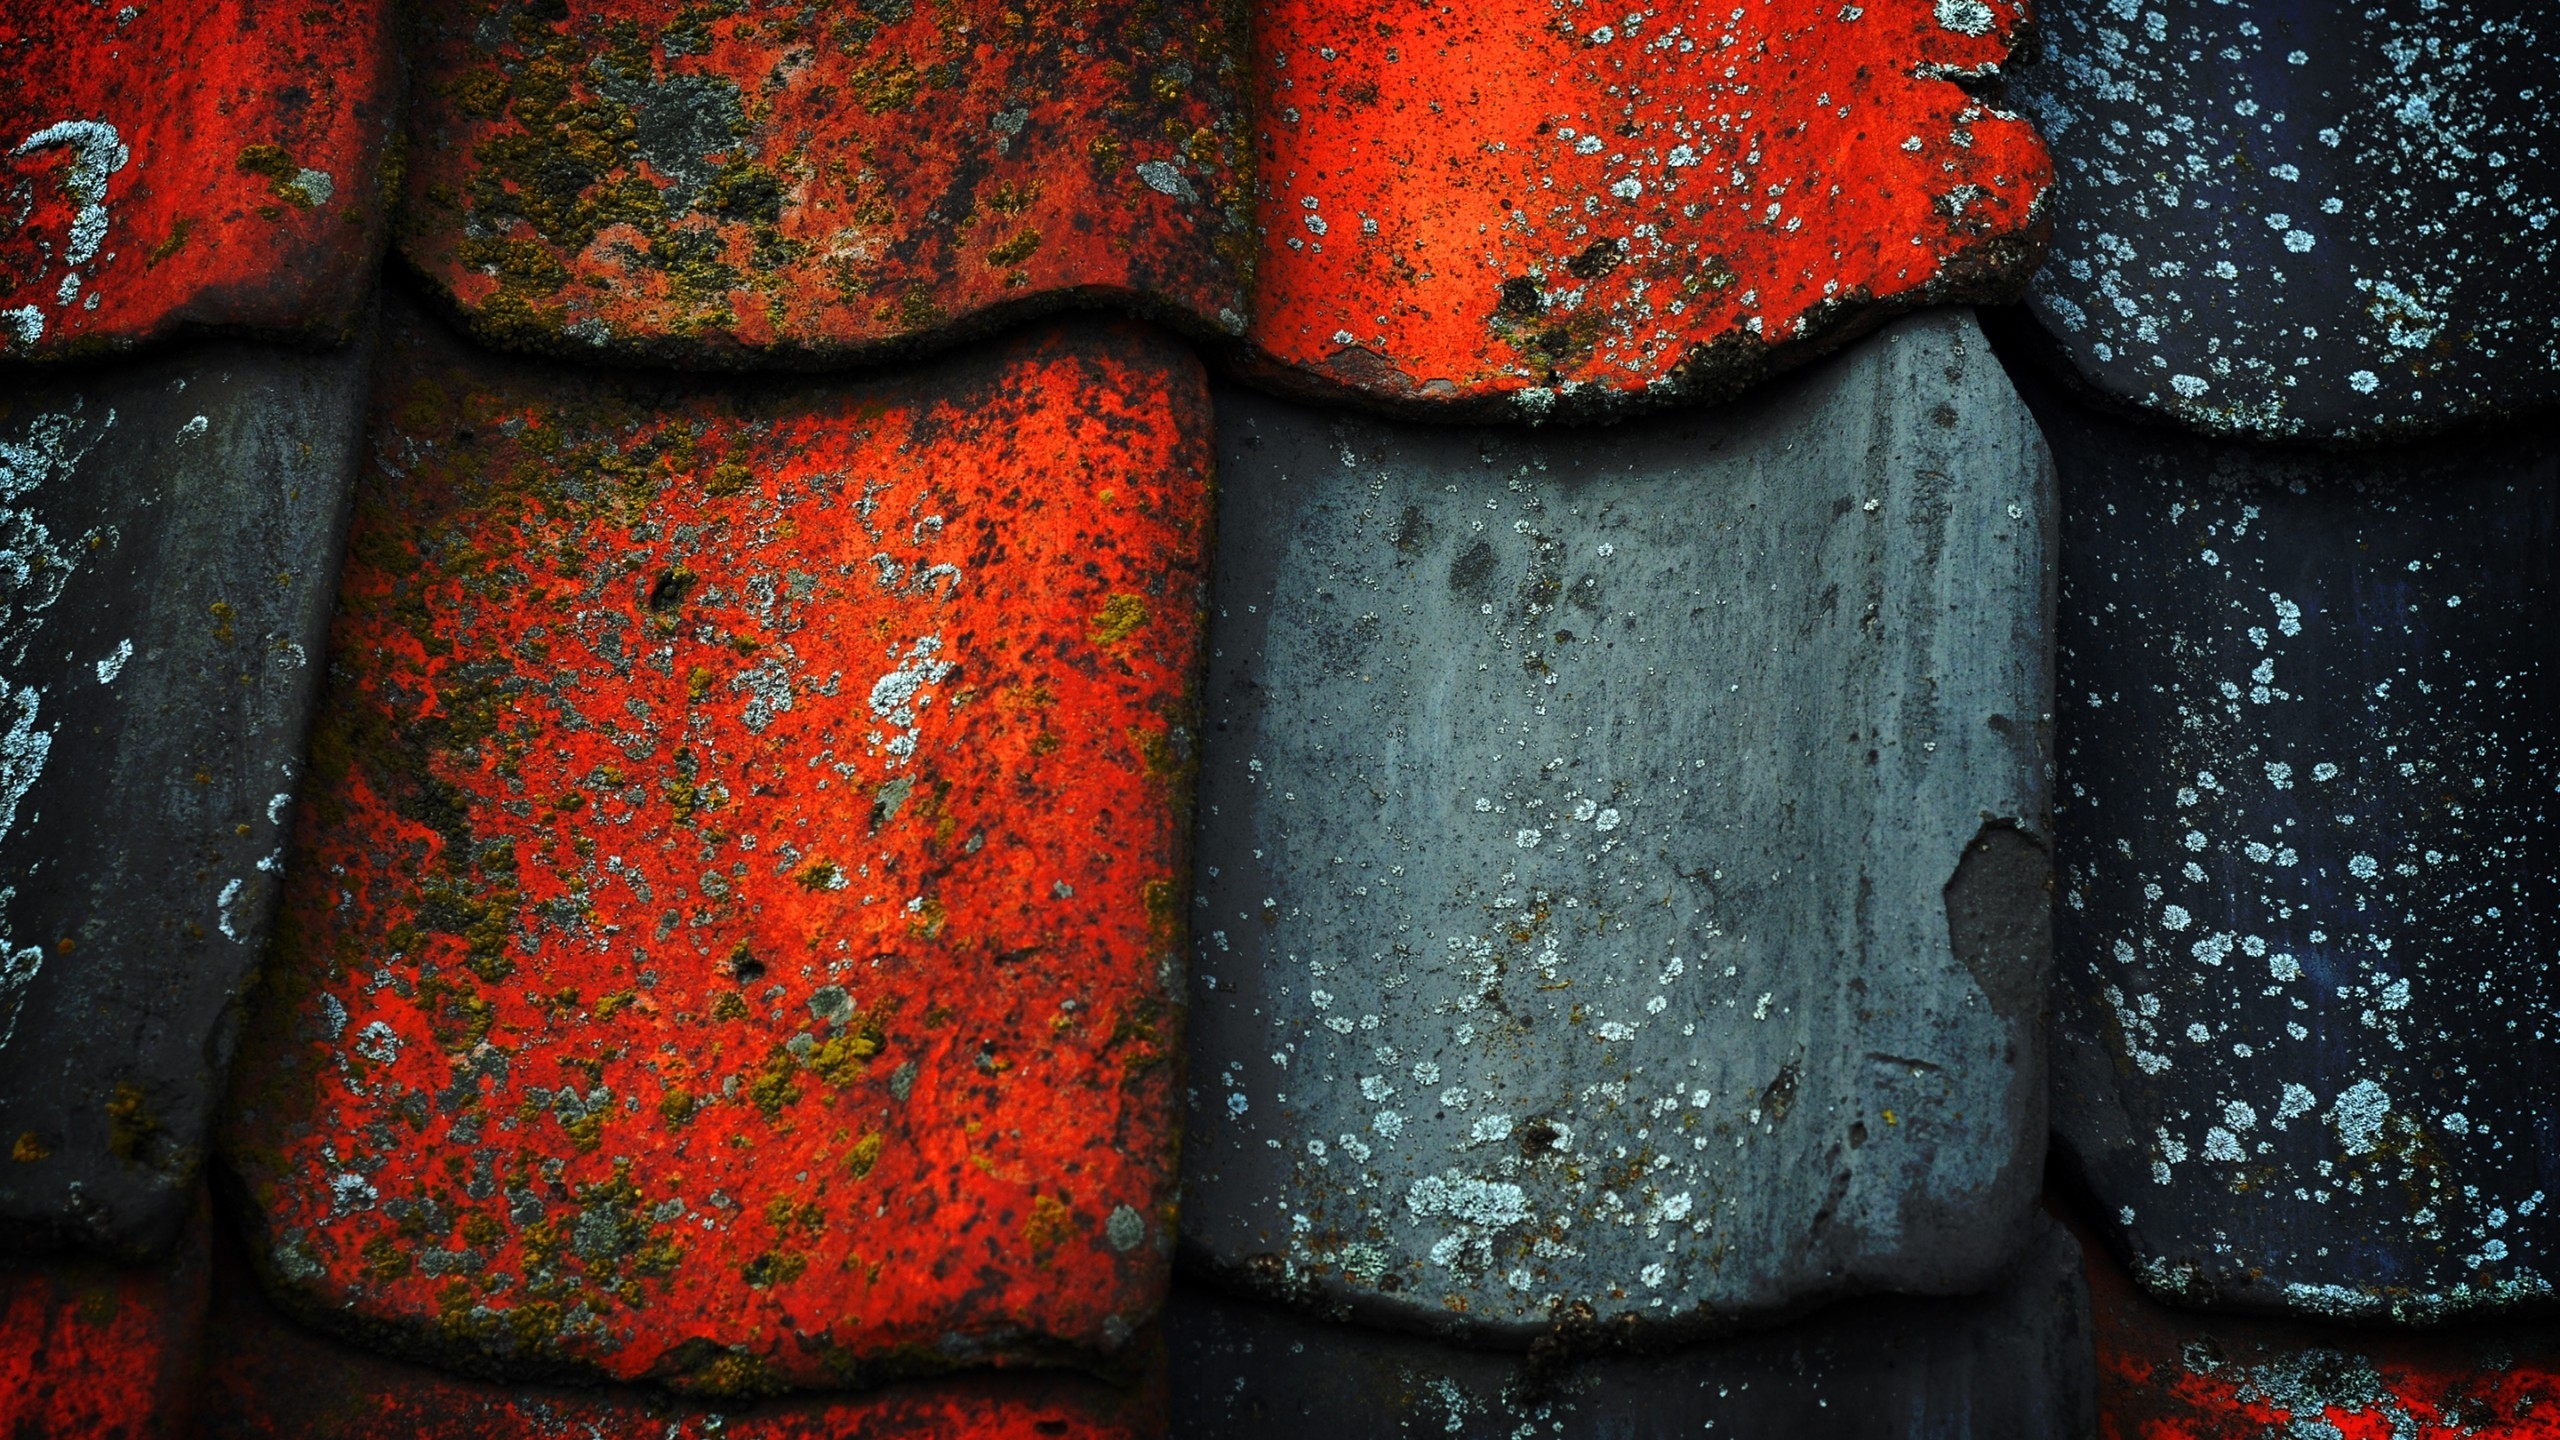 Roof Tile Texture for 2560x1440 HDTV resolution